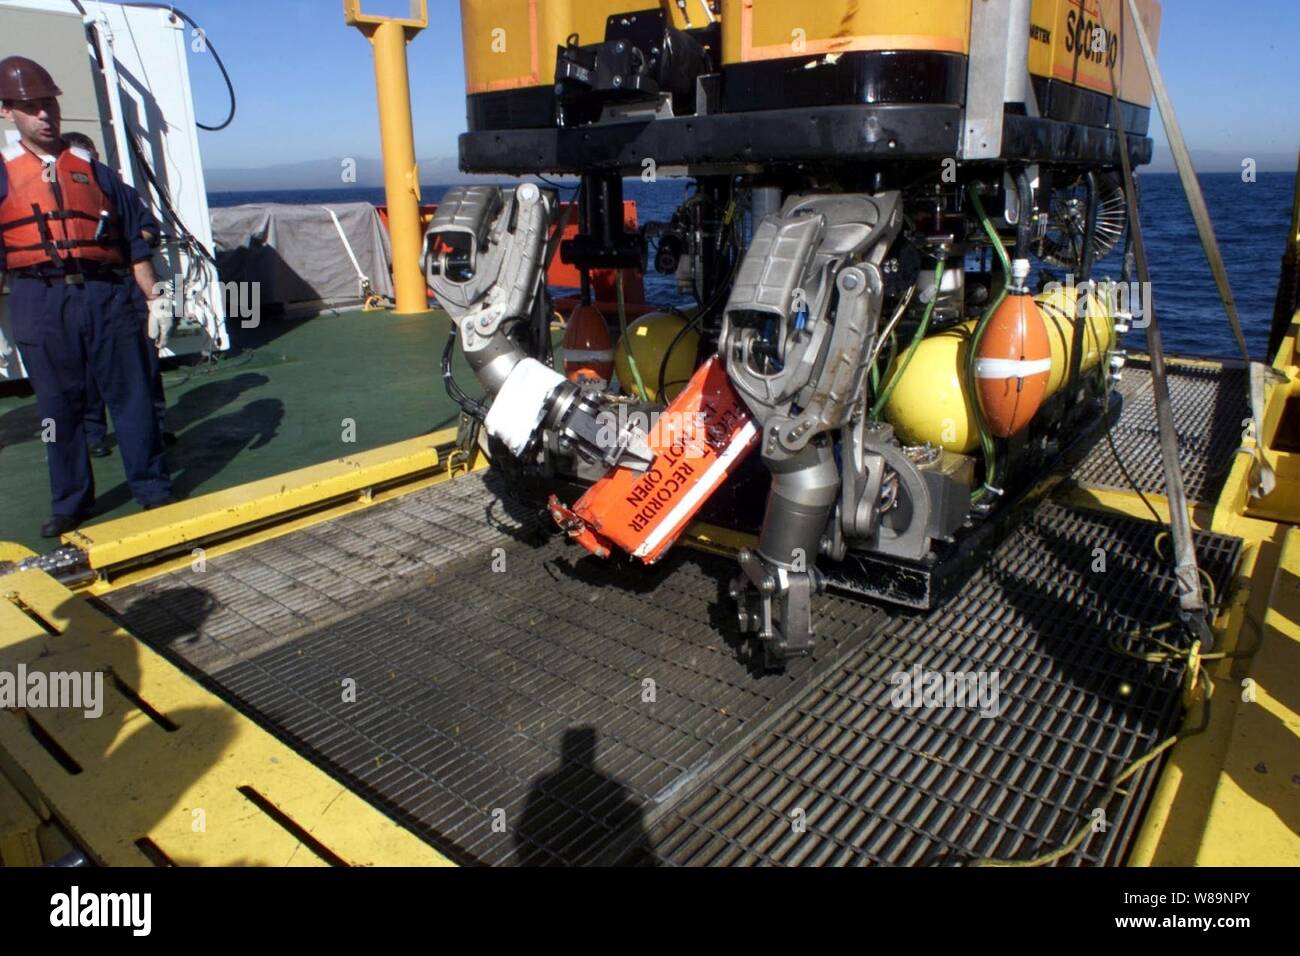 The remotely piloted vehicle SCORPIO sits on the deck of the MV Kellie Chouest after retrieving the flight data recorder from the downed Alaska Airlines Flight 261 off the coast of Ventura County, Calif., on Feb. 3, 2000.  The flight data recorder, more commonly called a black box, was located underwater and brought aboard the ship by SCORPIO, a tethered unmanned work vehicle from the Navy's Deep Submergence Unit Unmanned Vehicle Detachment.  The MV Kellie Chouest is a Military Sealift Command Submarine Support Ship. Stock Photo